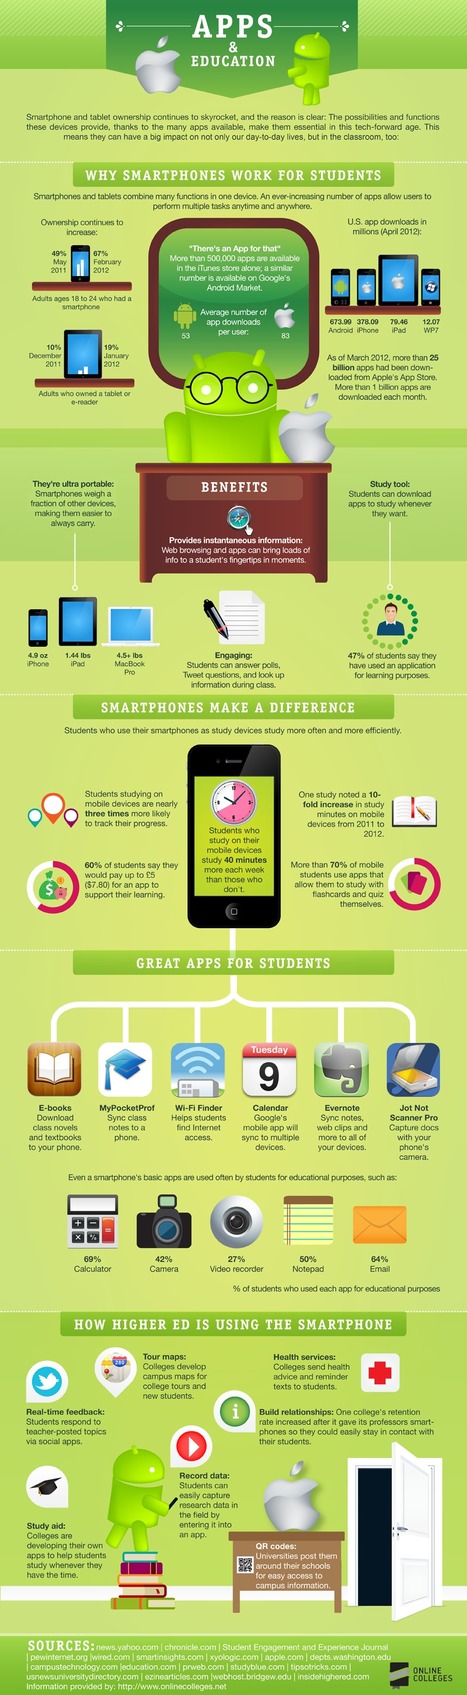 Trends | Infographic: Apps and Education | Mobile Learning | Scoop.it